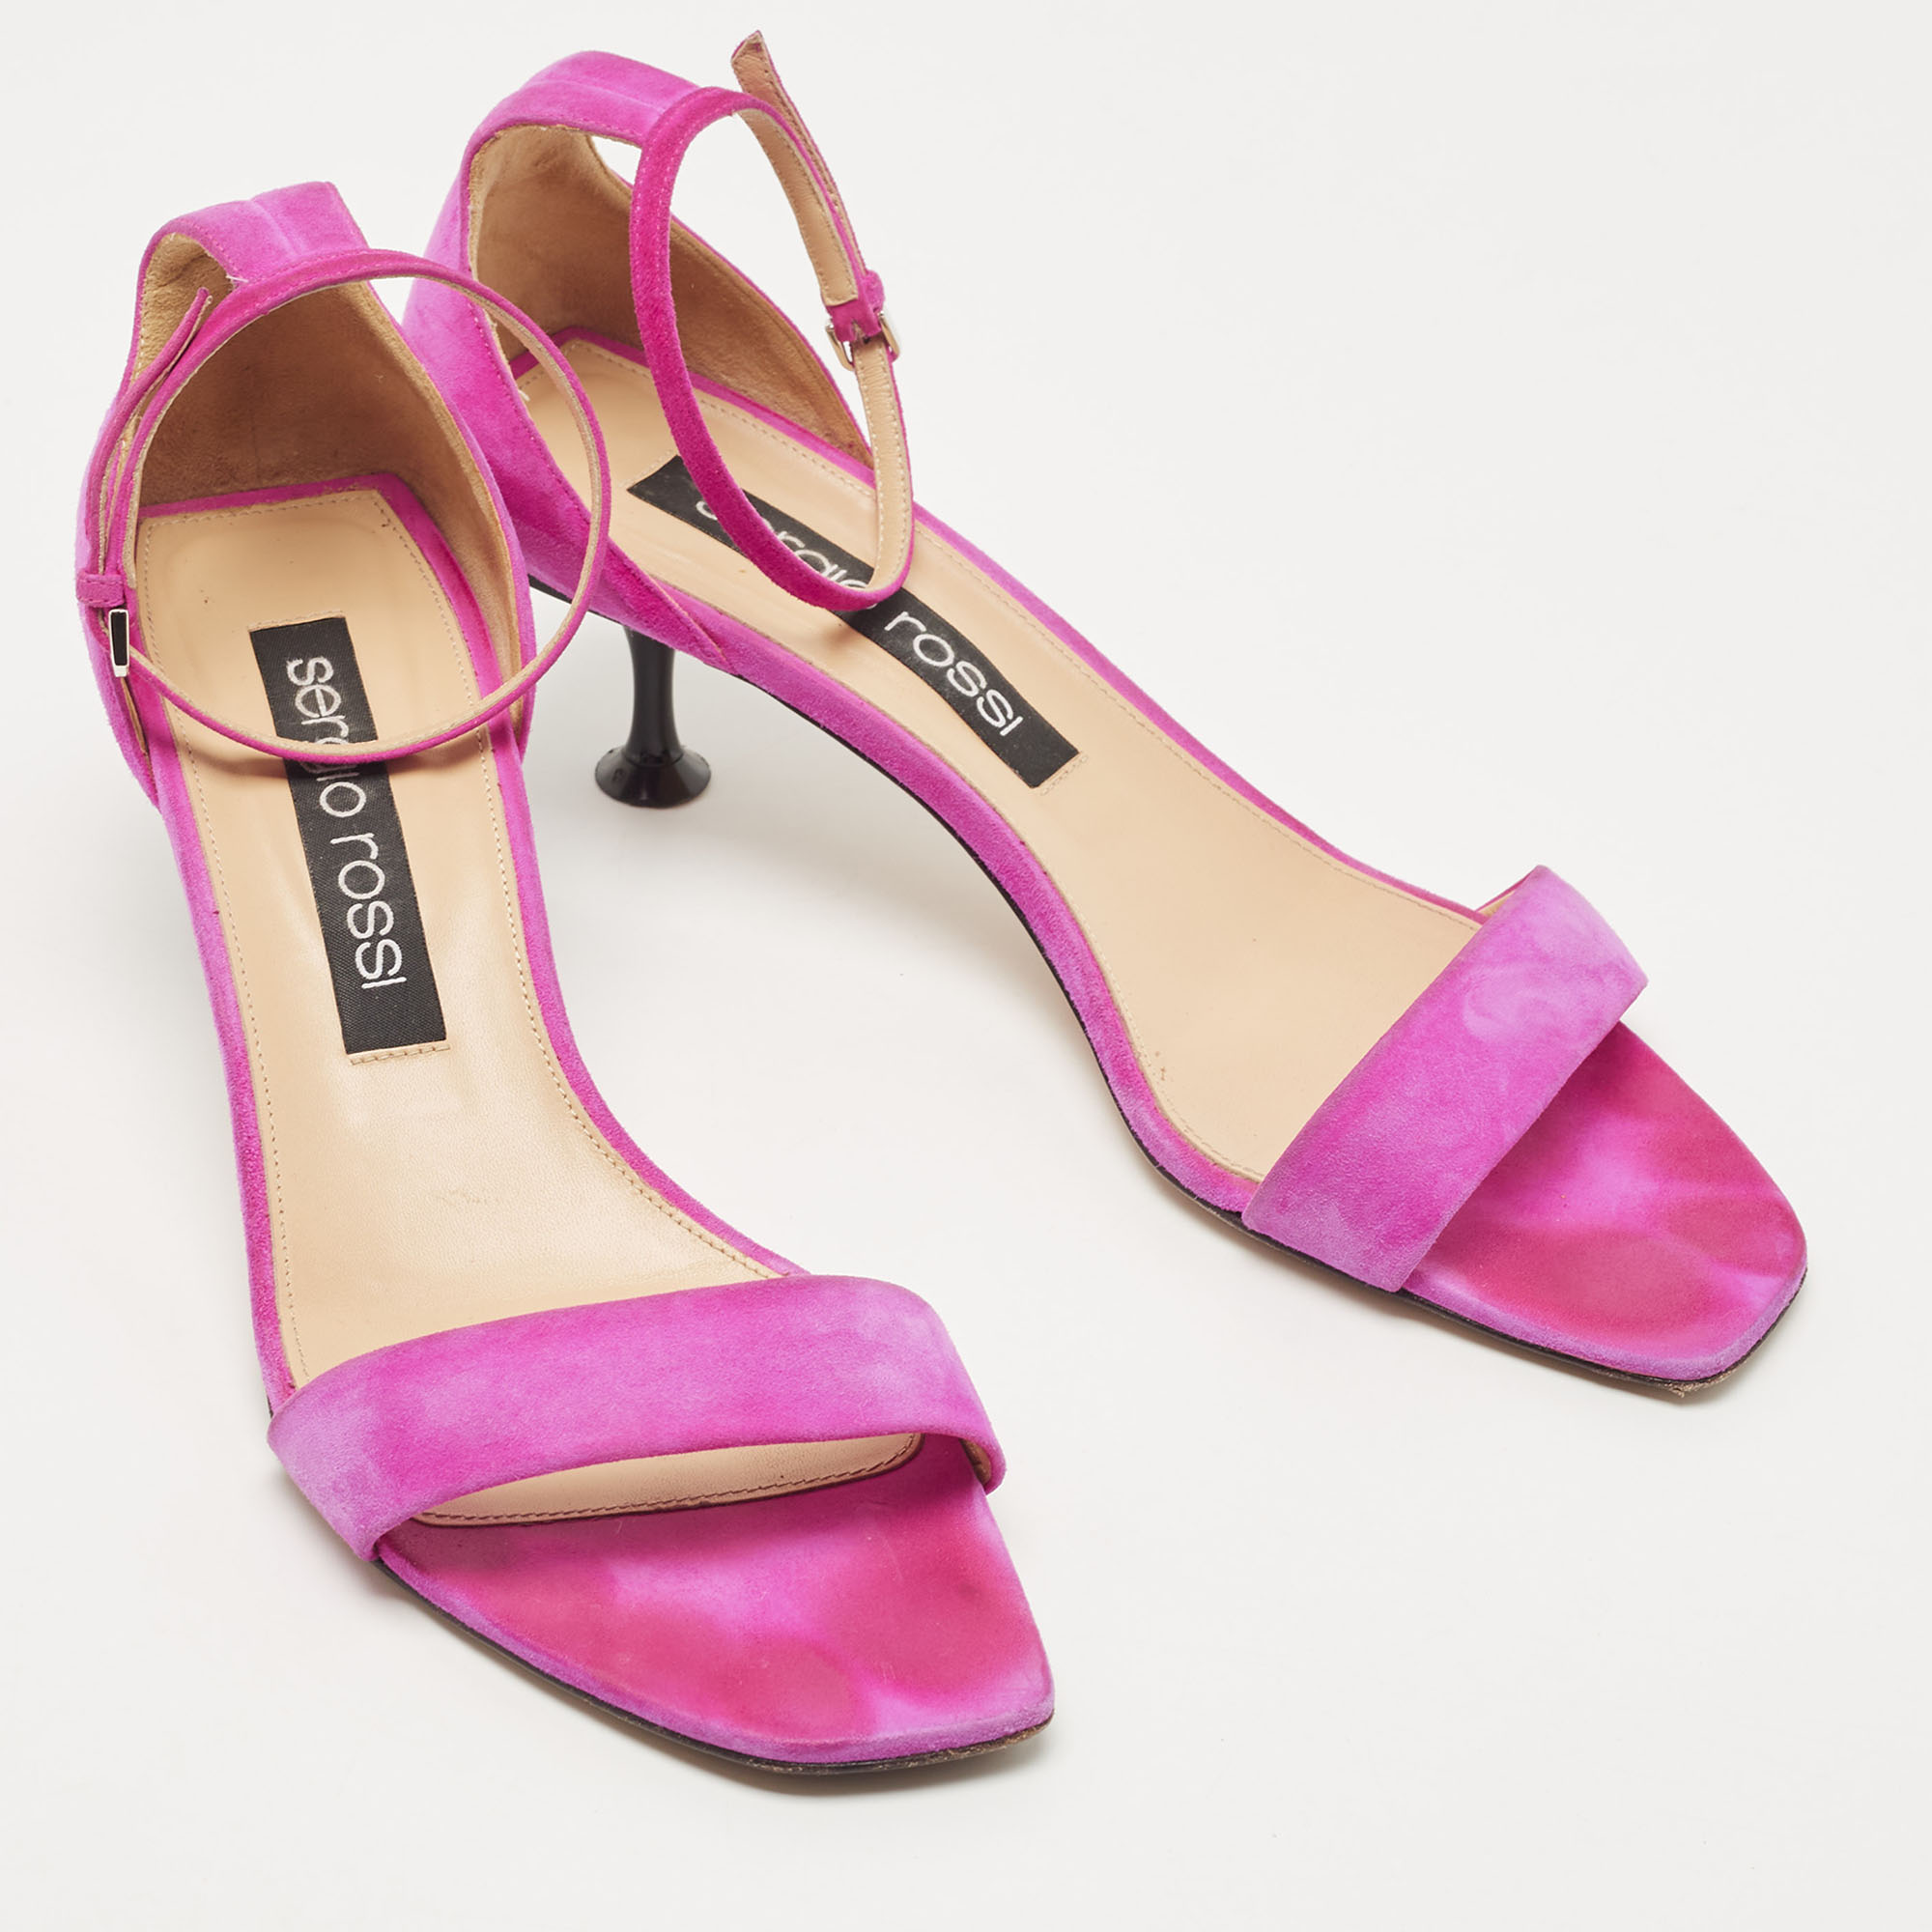 Sergio Rossi Pink Suede Ankle Strap Sandals Size 41